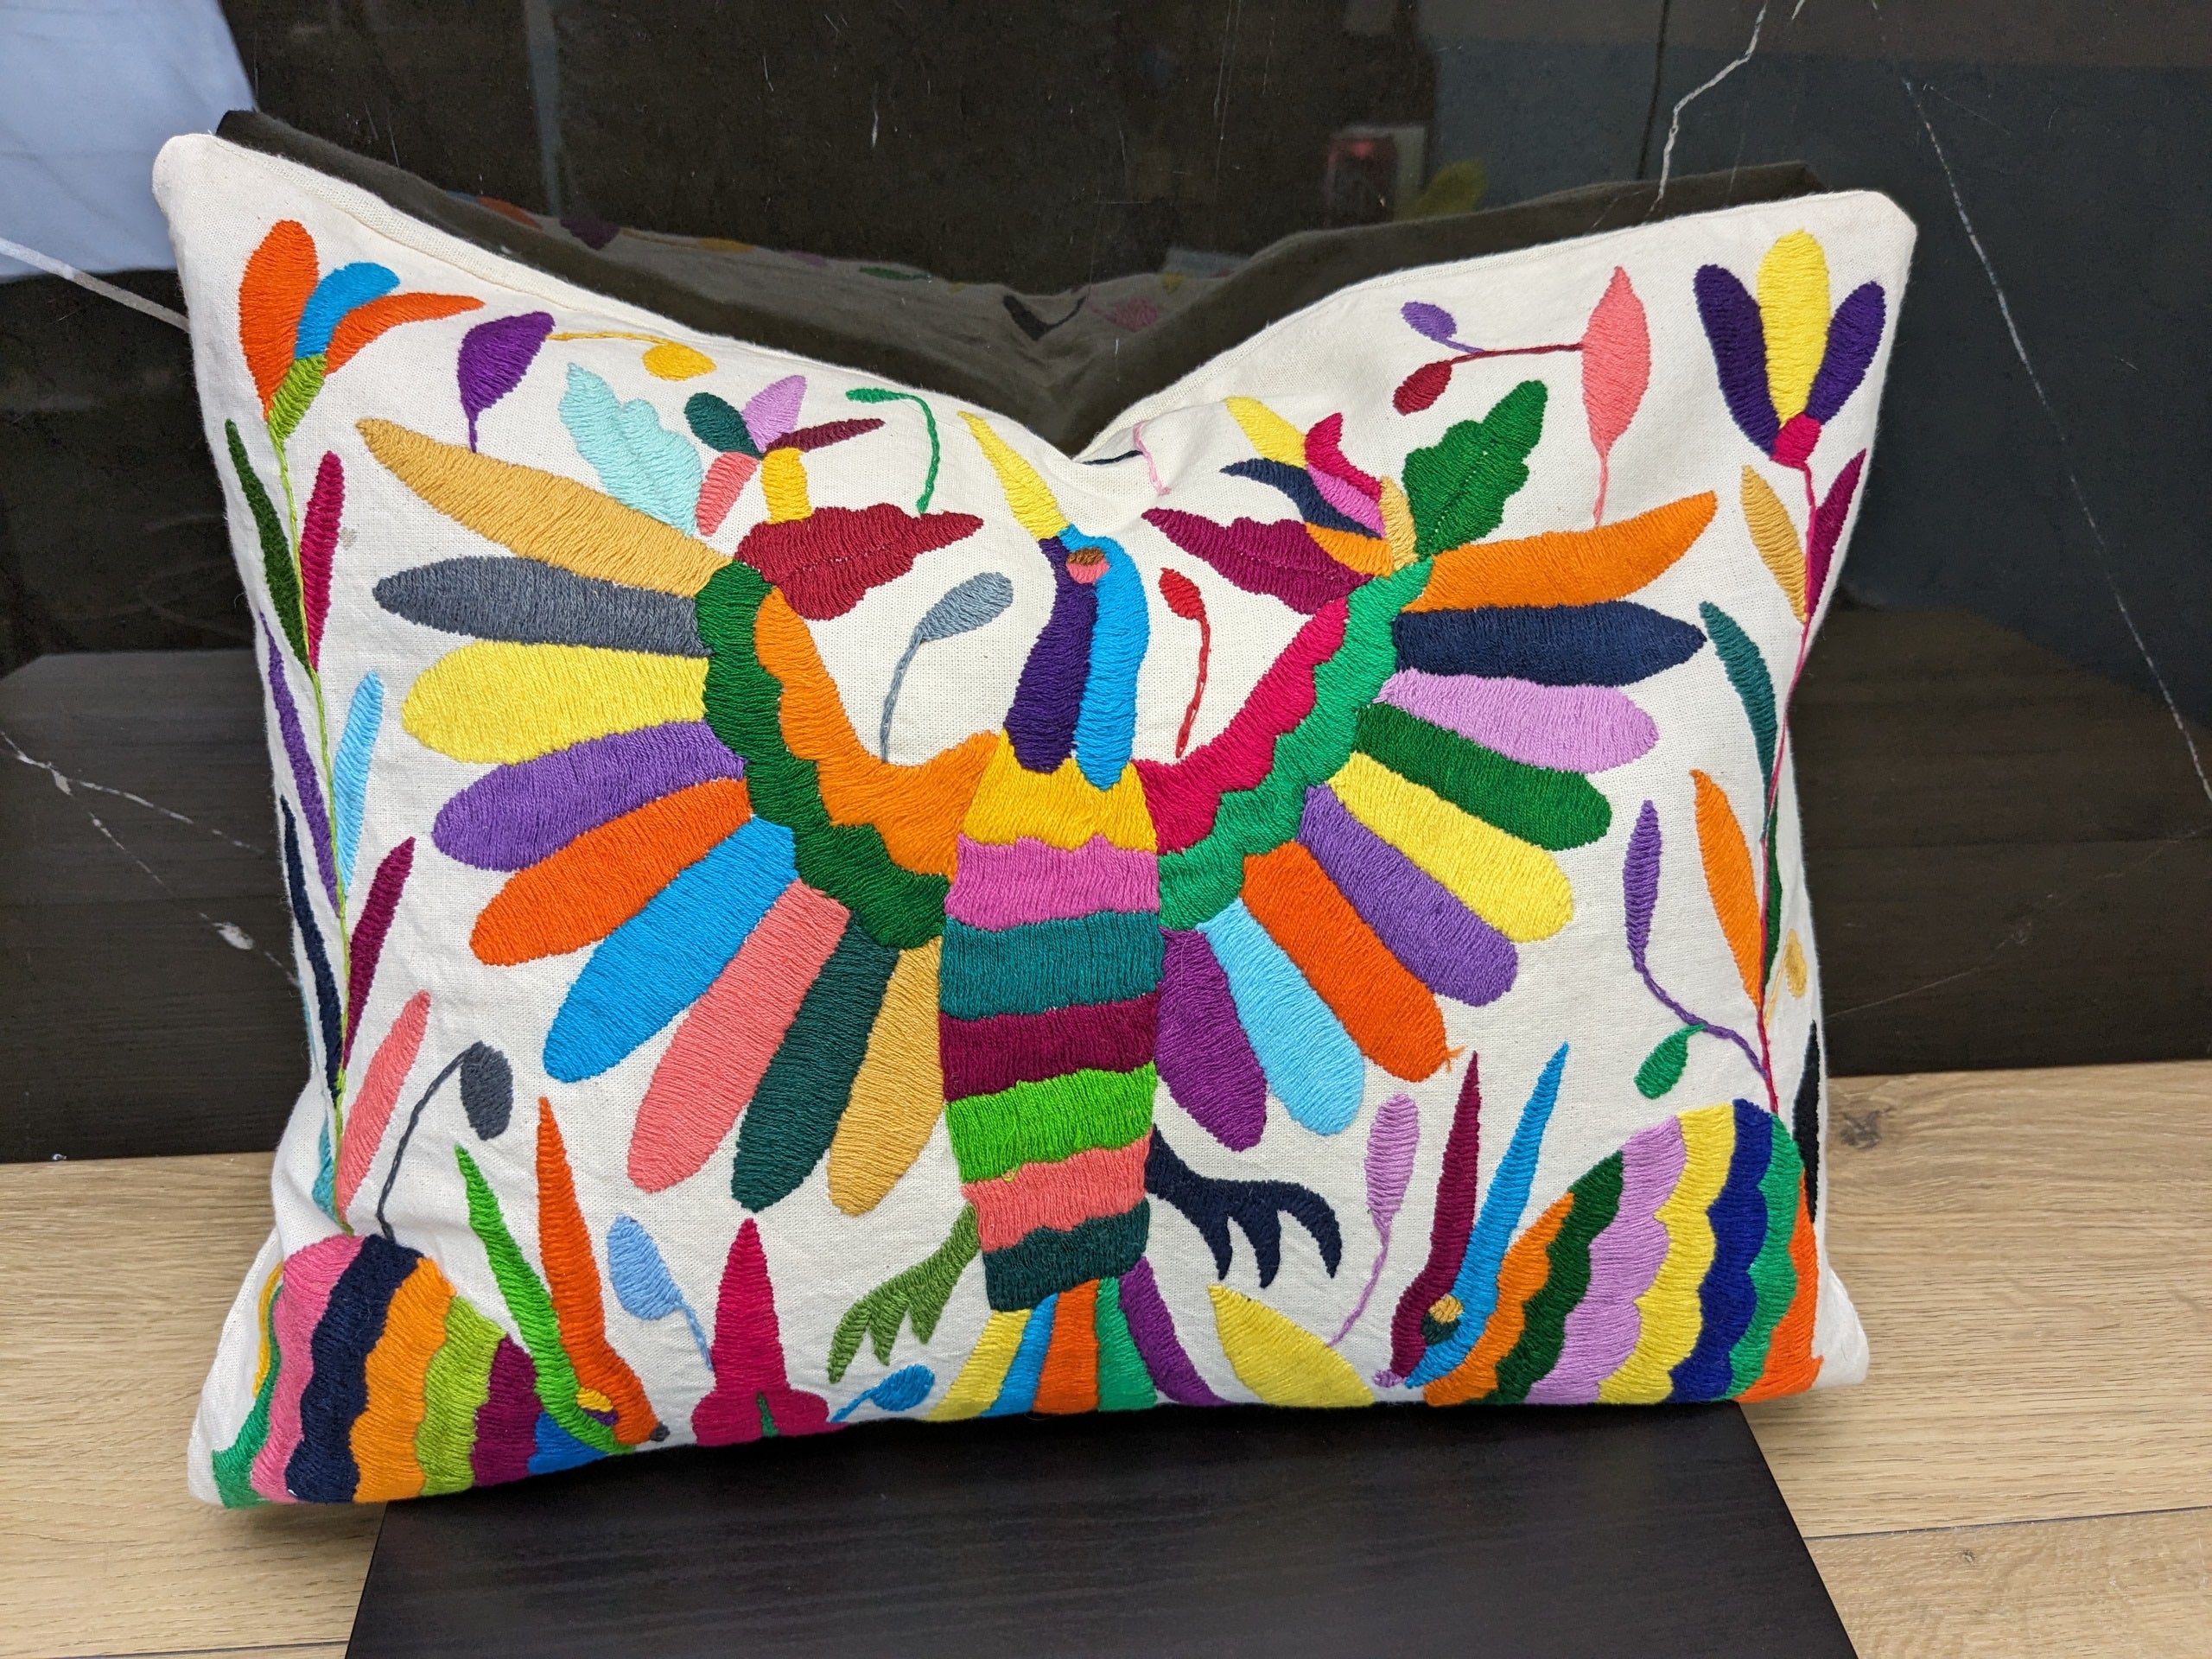 Rectangle Otomi Tenango Pillow Cover with Hand Embroidered Birds, Flowers, and Animals in Vibrant Colors. Handmade in Mexico. We package and ship from the USA. Buy now at www.felipeandgrace.com.